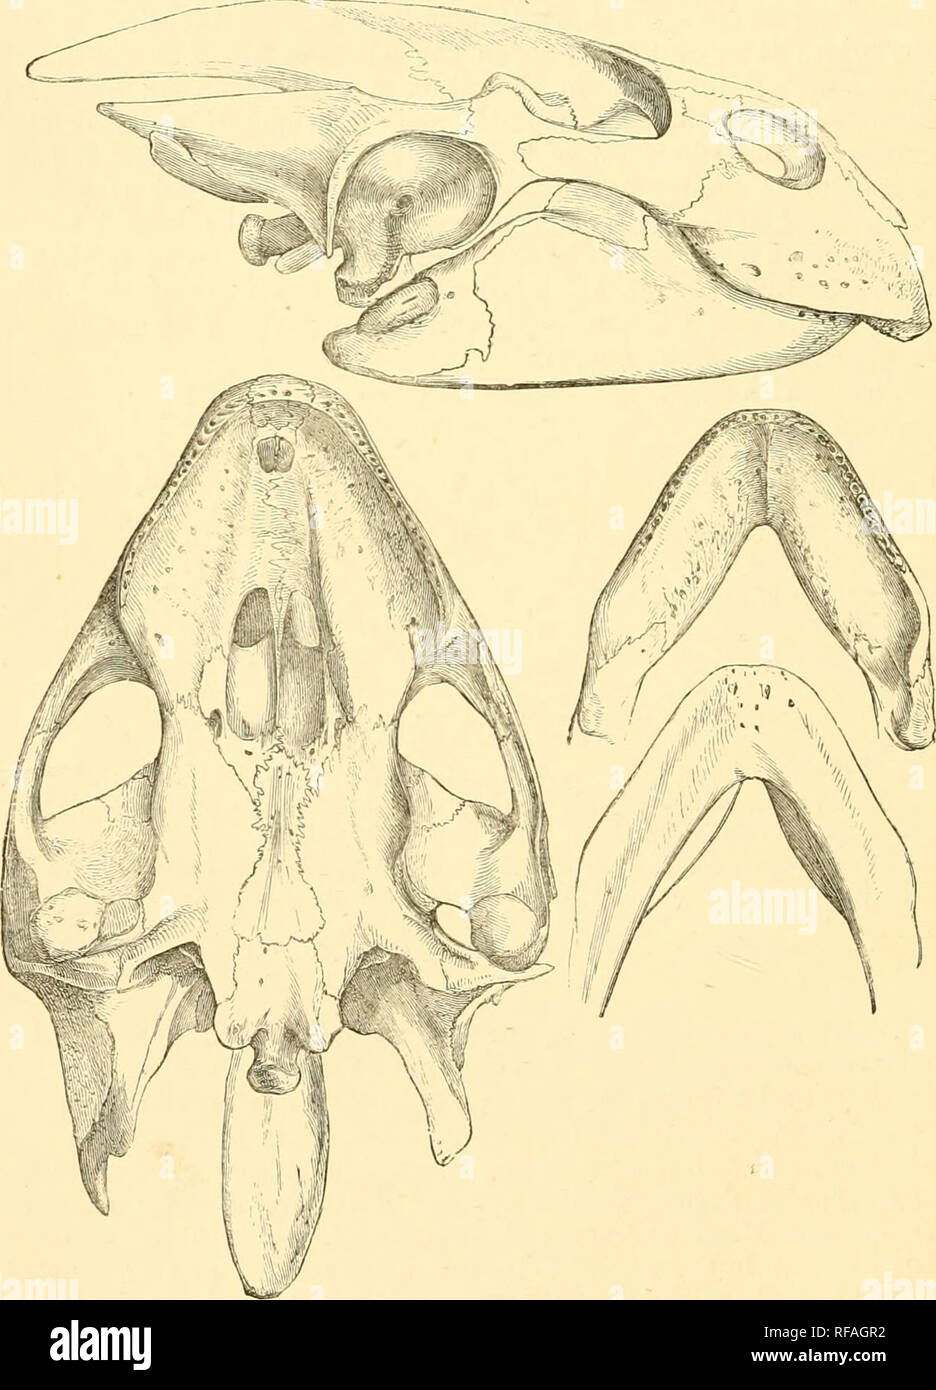 . Catalogue of the chelonians, rhynchocephalians, and crocodiles in the British museum (Natural history). Chelonia (Genus); Rhynchocephalia; Crocodiles. 252 TRIONTCHID^. Length of dorsal disk 50 centim. Burma; Java ? a. Ad., skull Araccan range, W. of Pegu. W. Theobald, Esq. [C.]. Si, shell. h. Hgr., skull Pegu. &amp; shell. c. Yg., skull. Pegu. d. Ad., skull. Java ? Shell presented by the Council of the Bristol Museum. (Type.) W. Theobald, Esq. [P.]. W. Theobald, Esq. [P.]. (Type of T. jeudi.) .Fiff. fi6.. Skull of Trionyx pluujrii. (From Gray, P. Z. S. 1869.). Please note that these images a Stock Photo